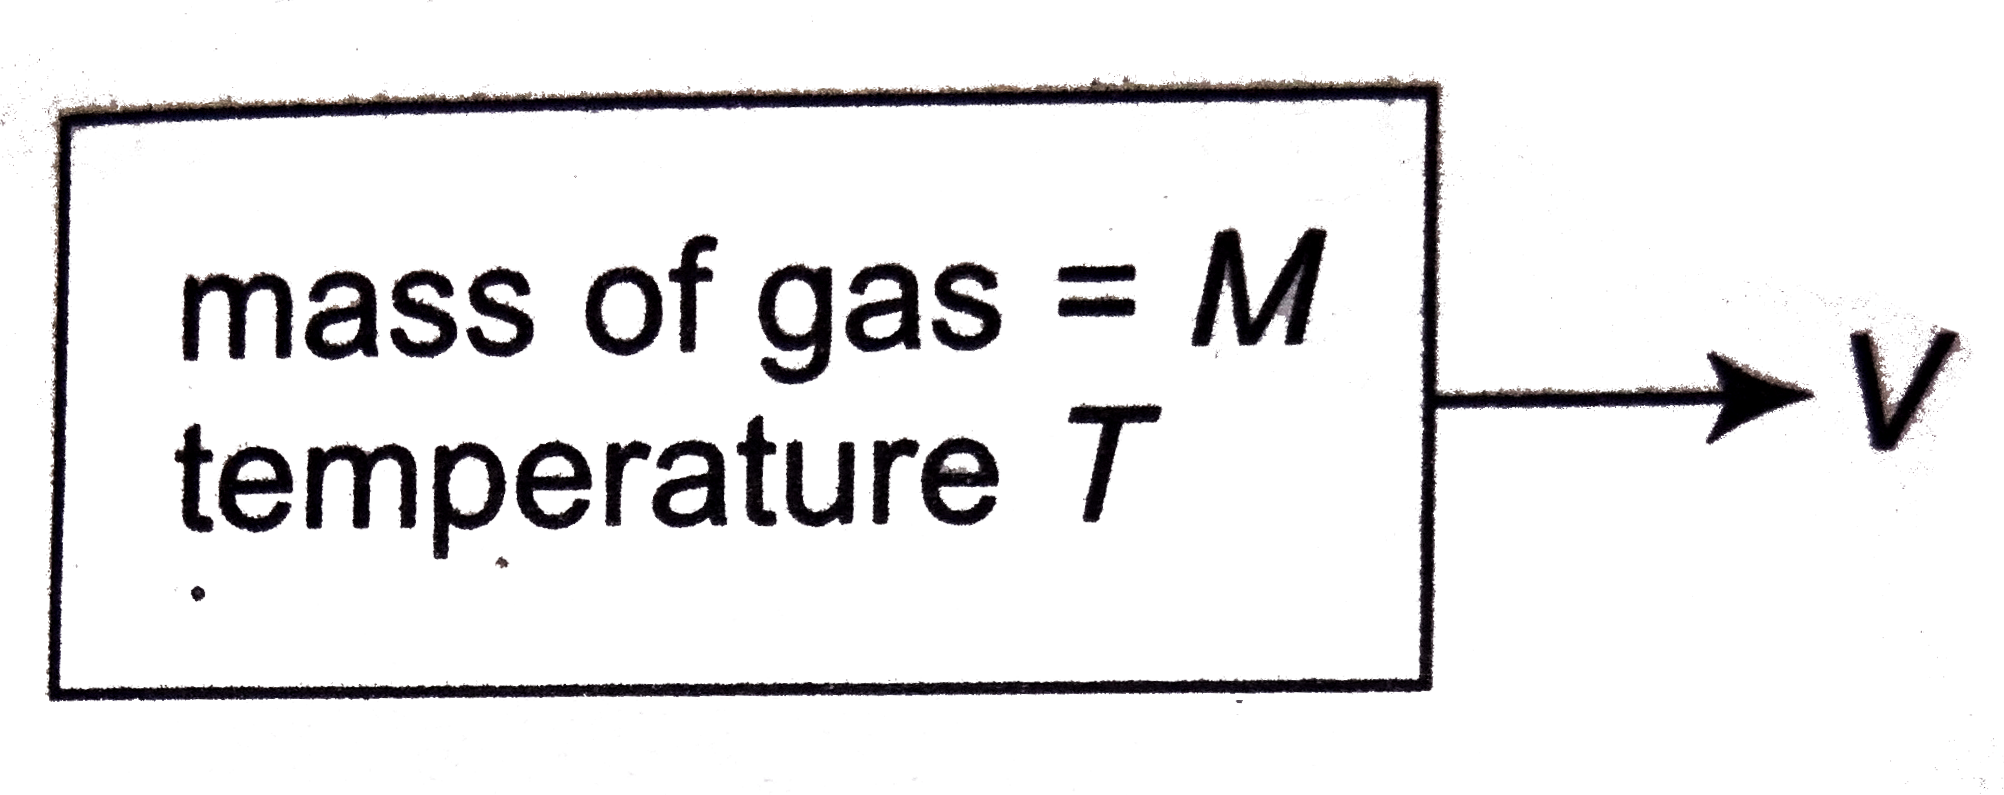 A light container having a diatomic gas enclosed with in is moving with velocity v. Mass of the gas is M and number of moles is n. The kinetic energy of gas w.r.t ground is